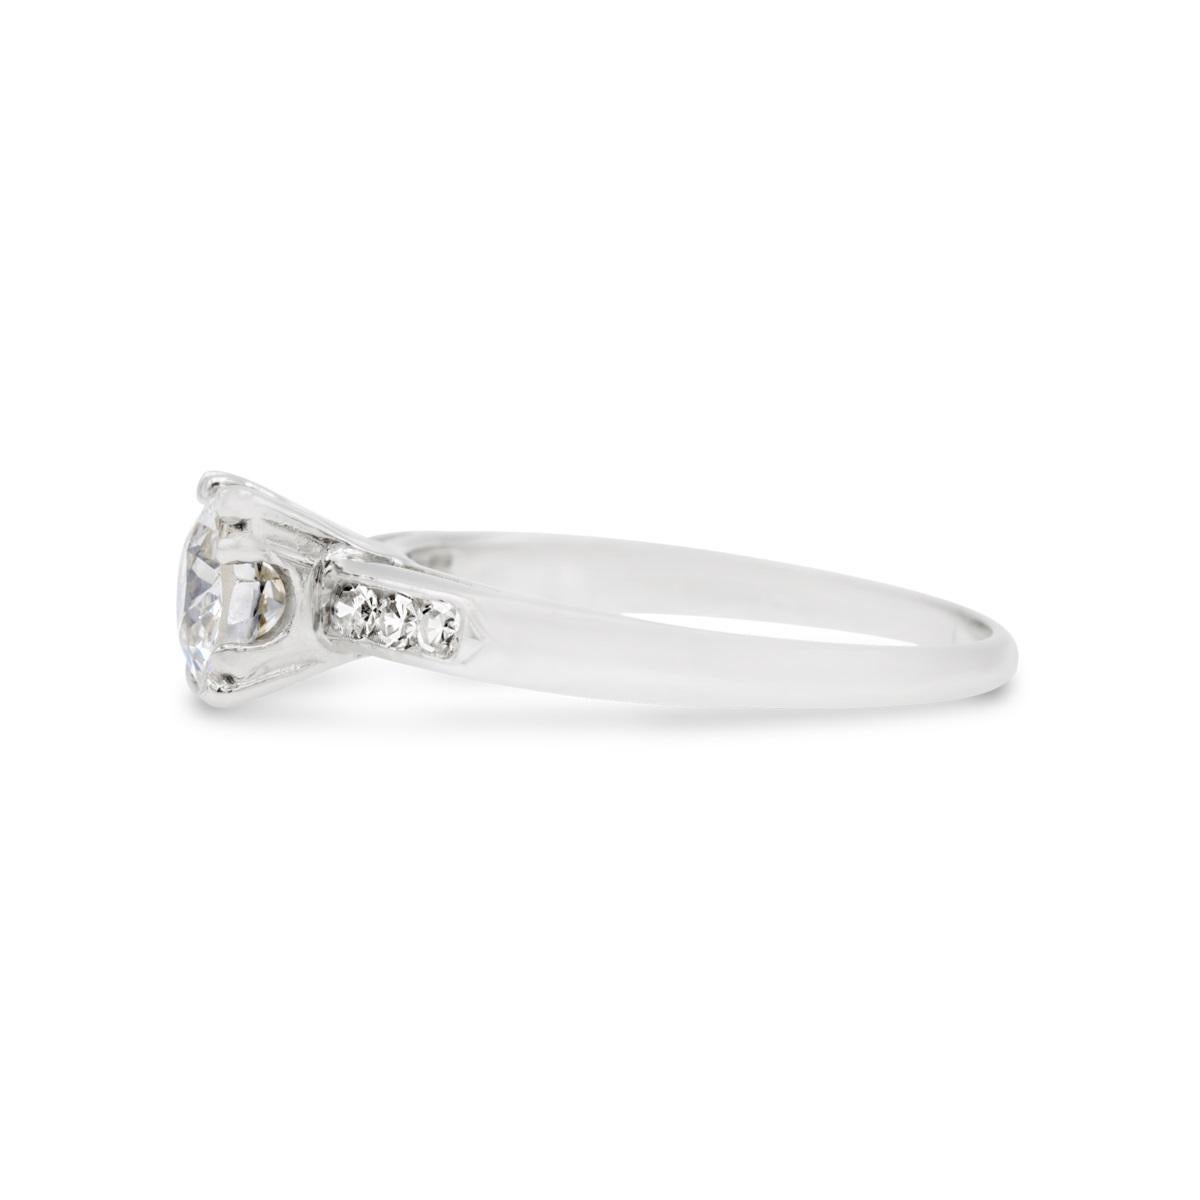 Old European Cut Art Deco GIA Certified 1.10 Ct. Diamond Engagement Ring K VS1 For Sale